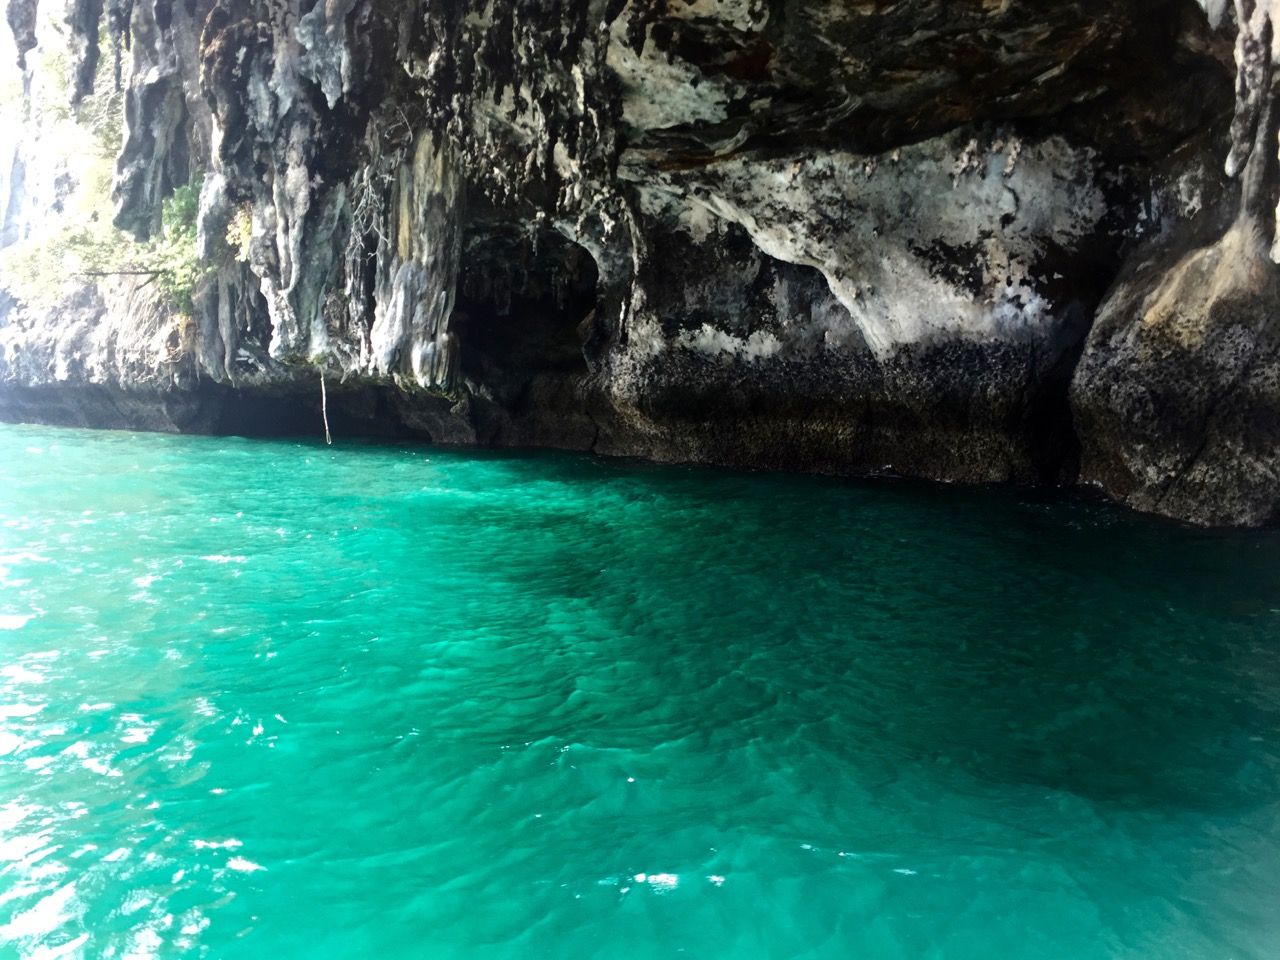 Brightly illuminated water under a cave formation.